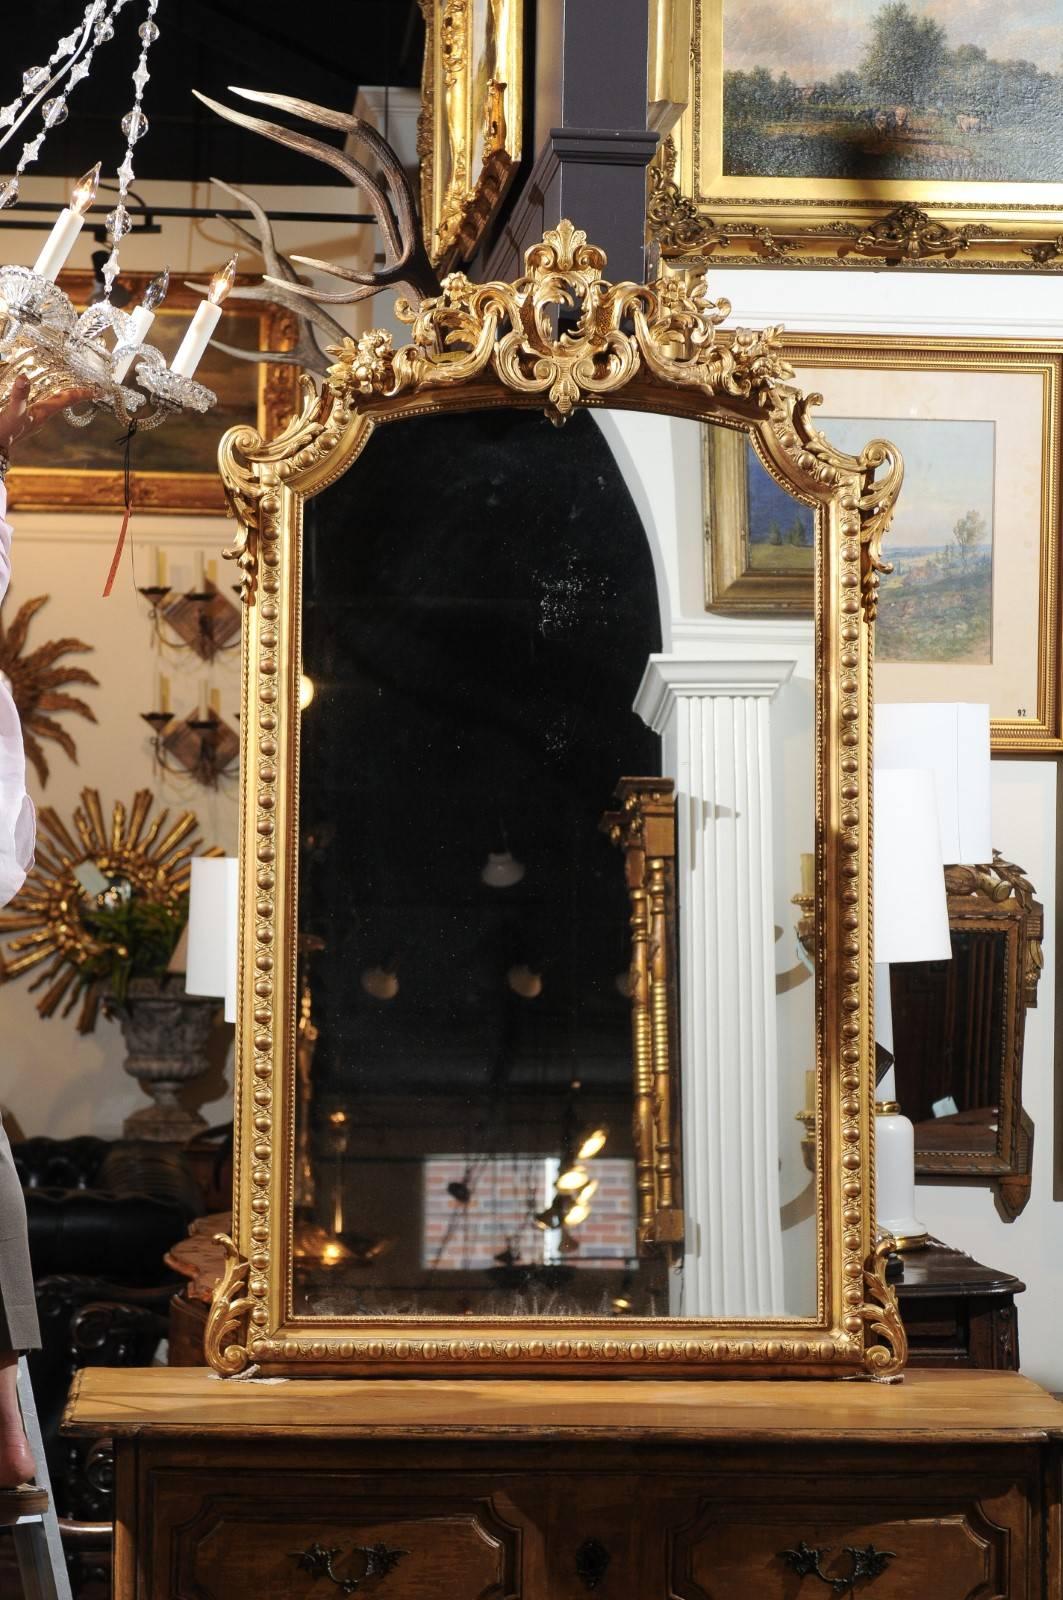 A French Rococo style giltwood mirror with carved crest from the 19th century. This vertical French Rococo style mirror features a trapezoidal frame, adorned with delicate beads, and egg motifs set inside a guilloche style frieze. Two acanthus